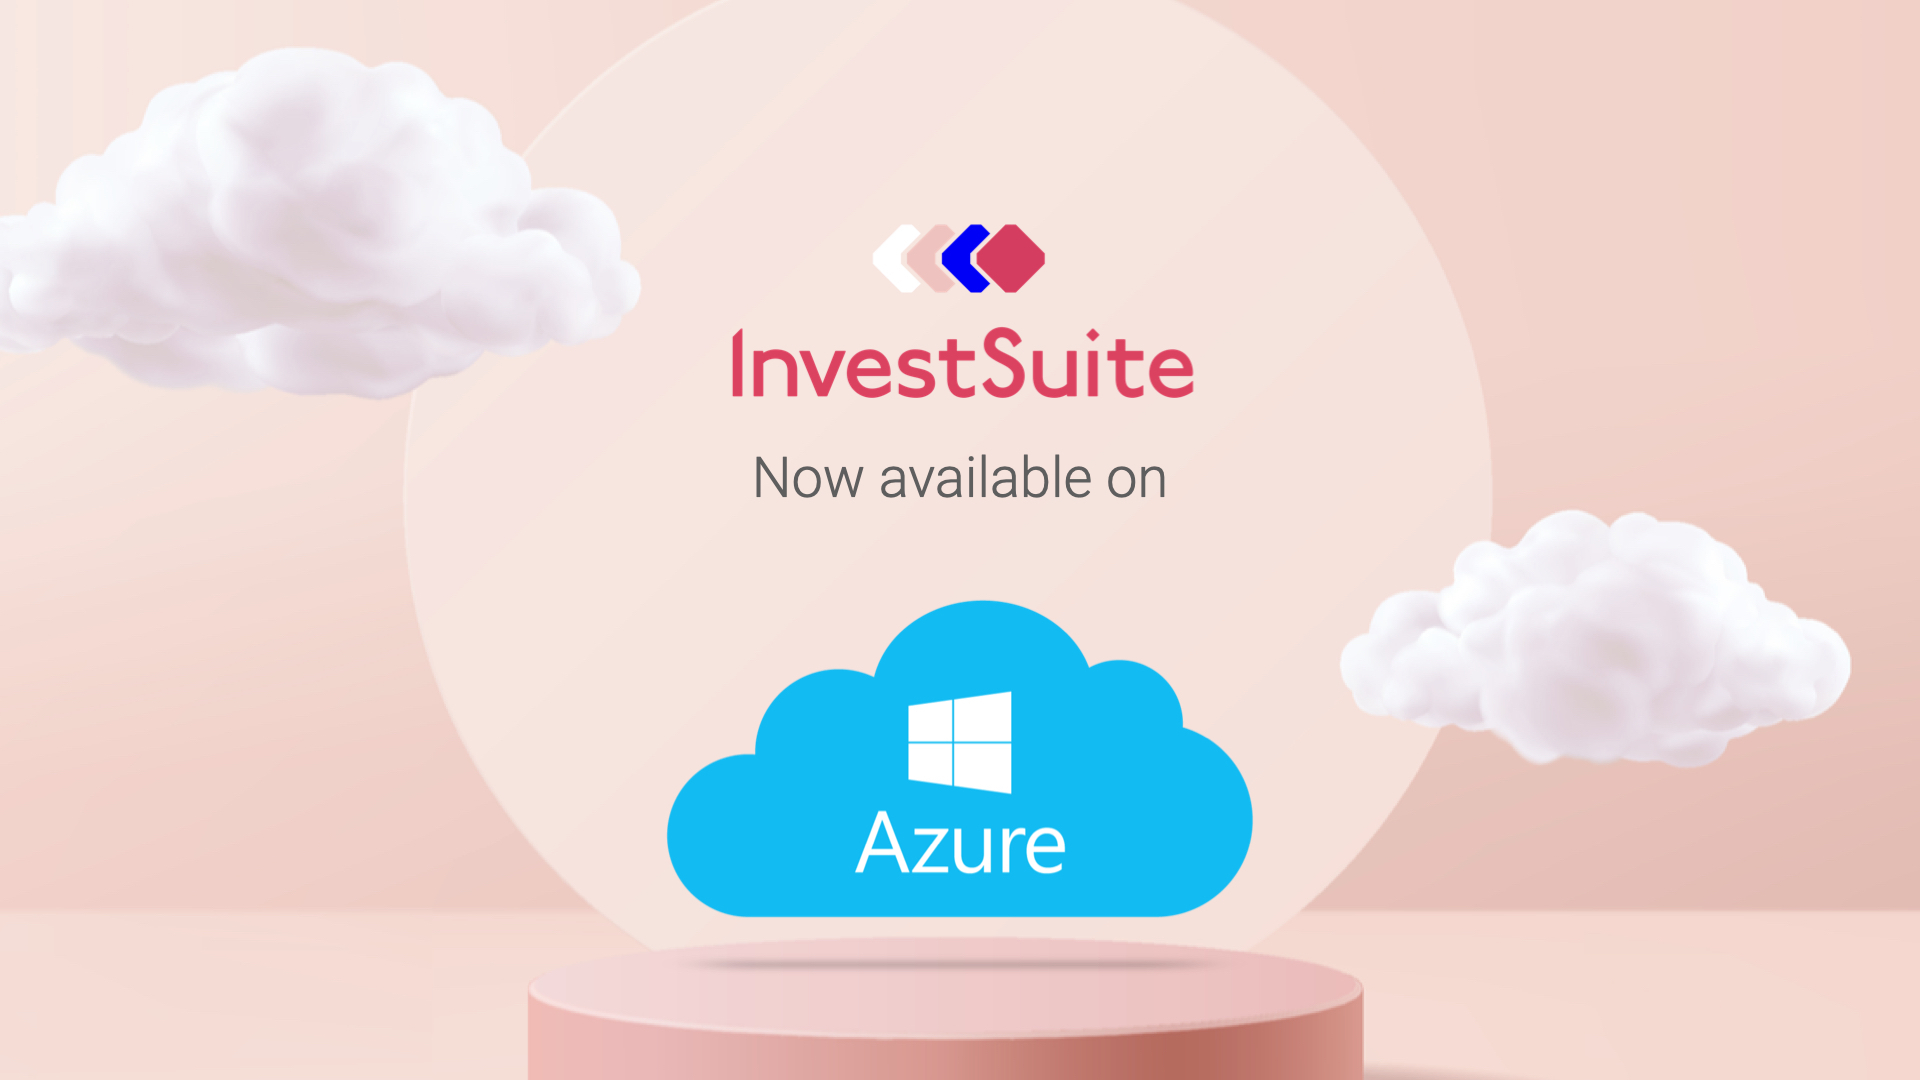 InvestSuite’s B2B WealthTech solutions now available in Microsoft Azure Marketplace